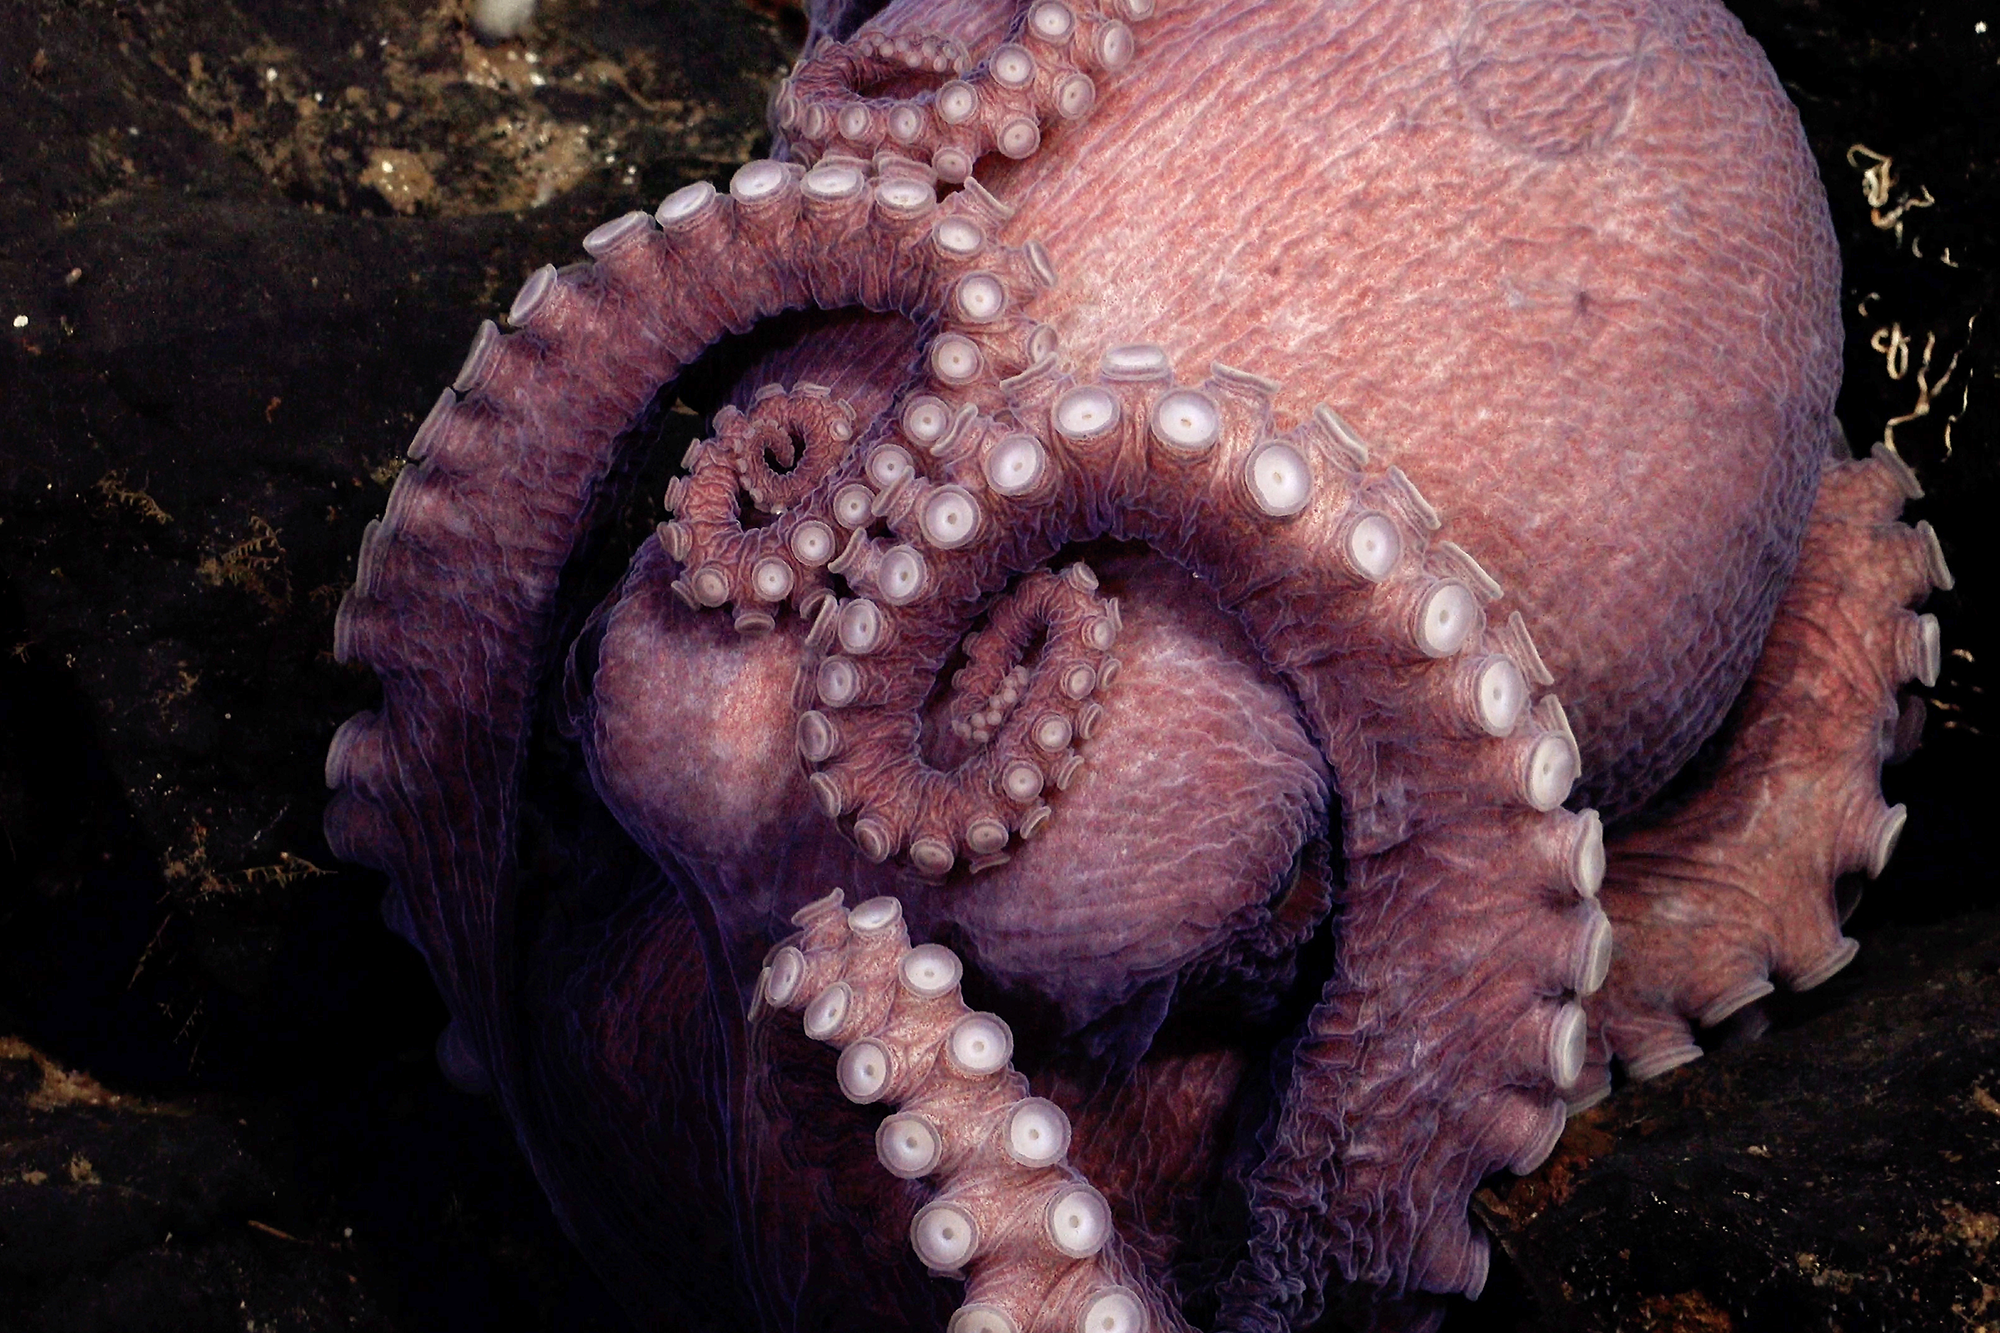 Four New Octopus Species Discovered in the Deep Sea